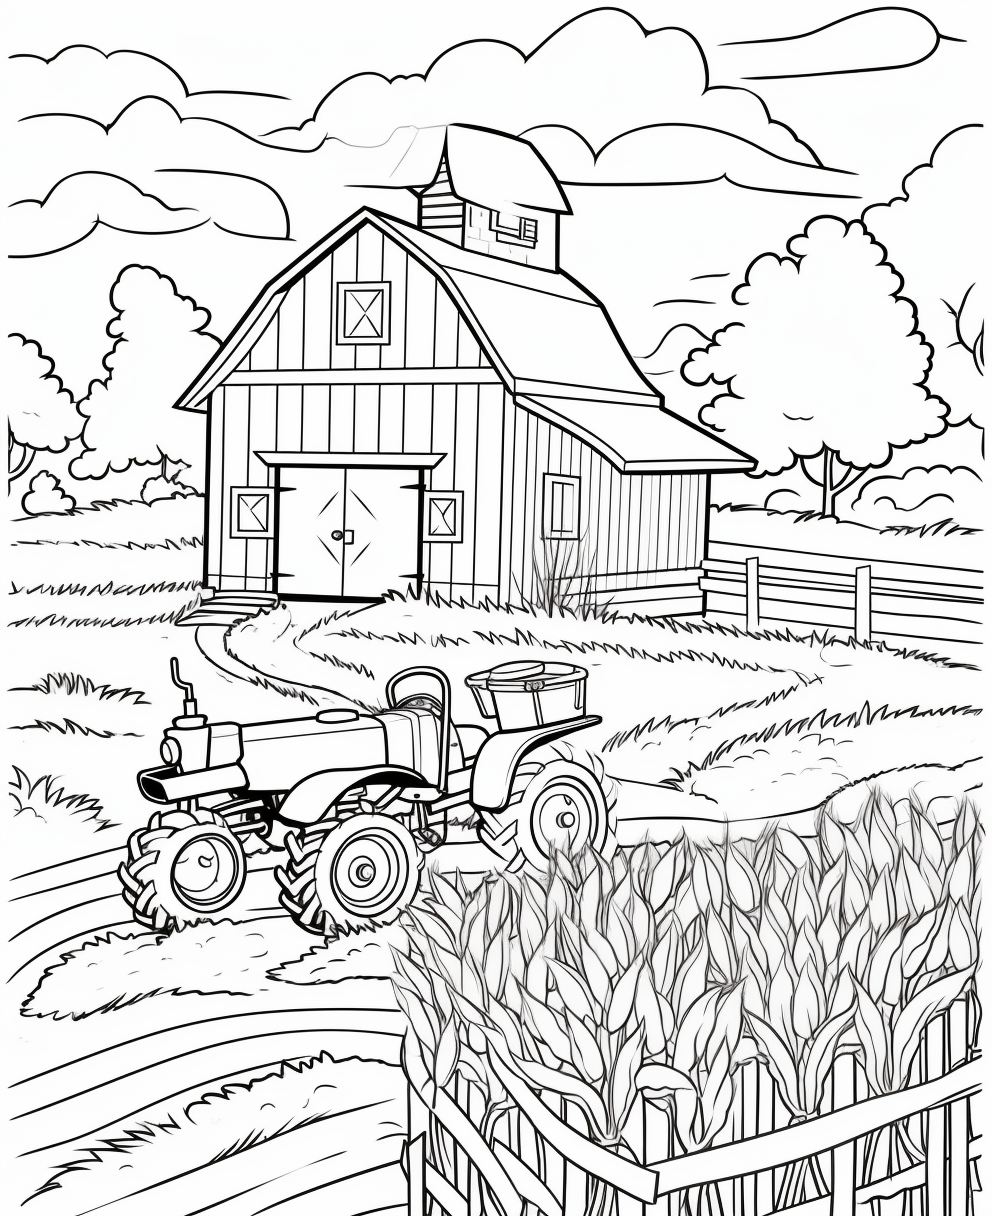 Illustrate a farmhouse during the harvest season. Show fields of golden ...